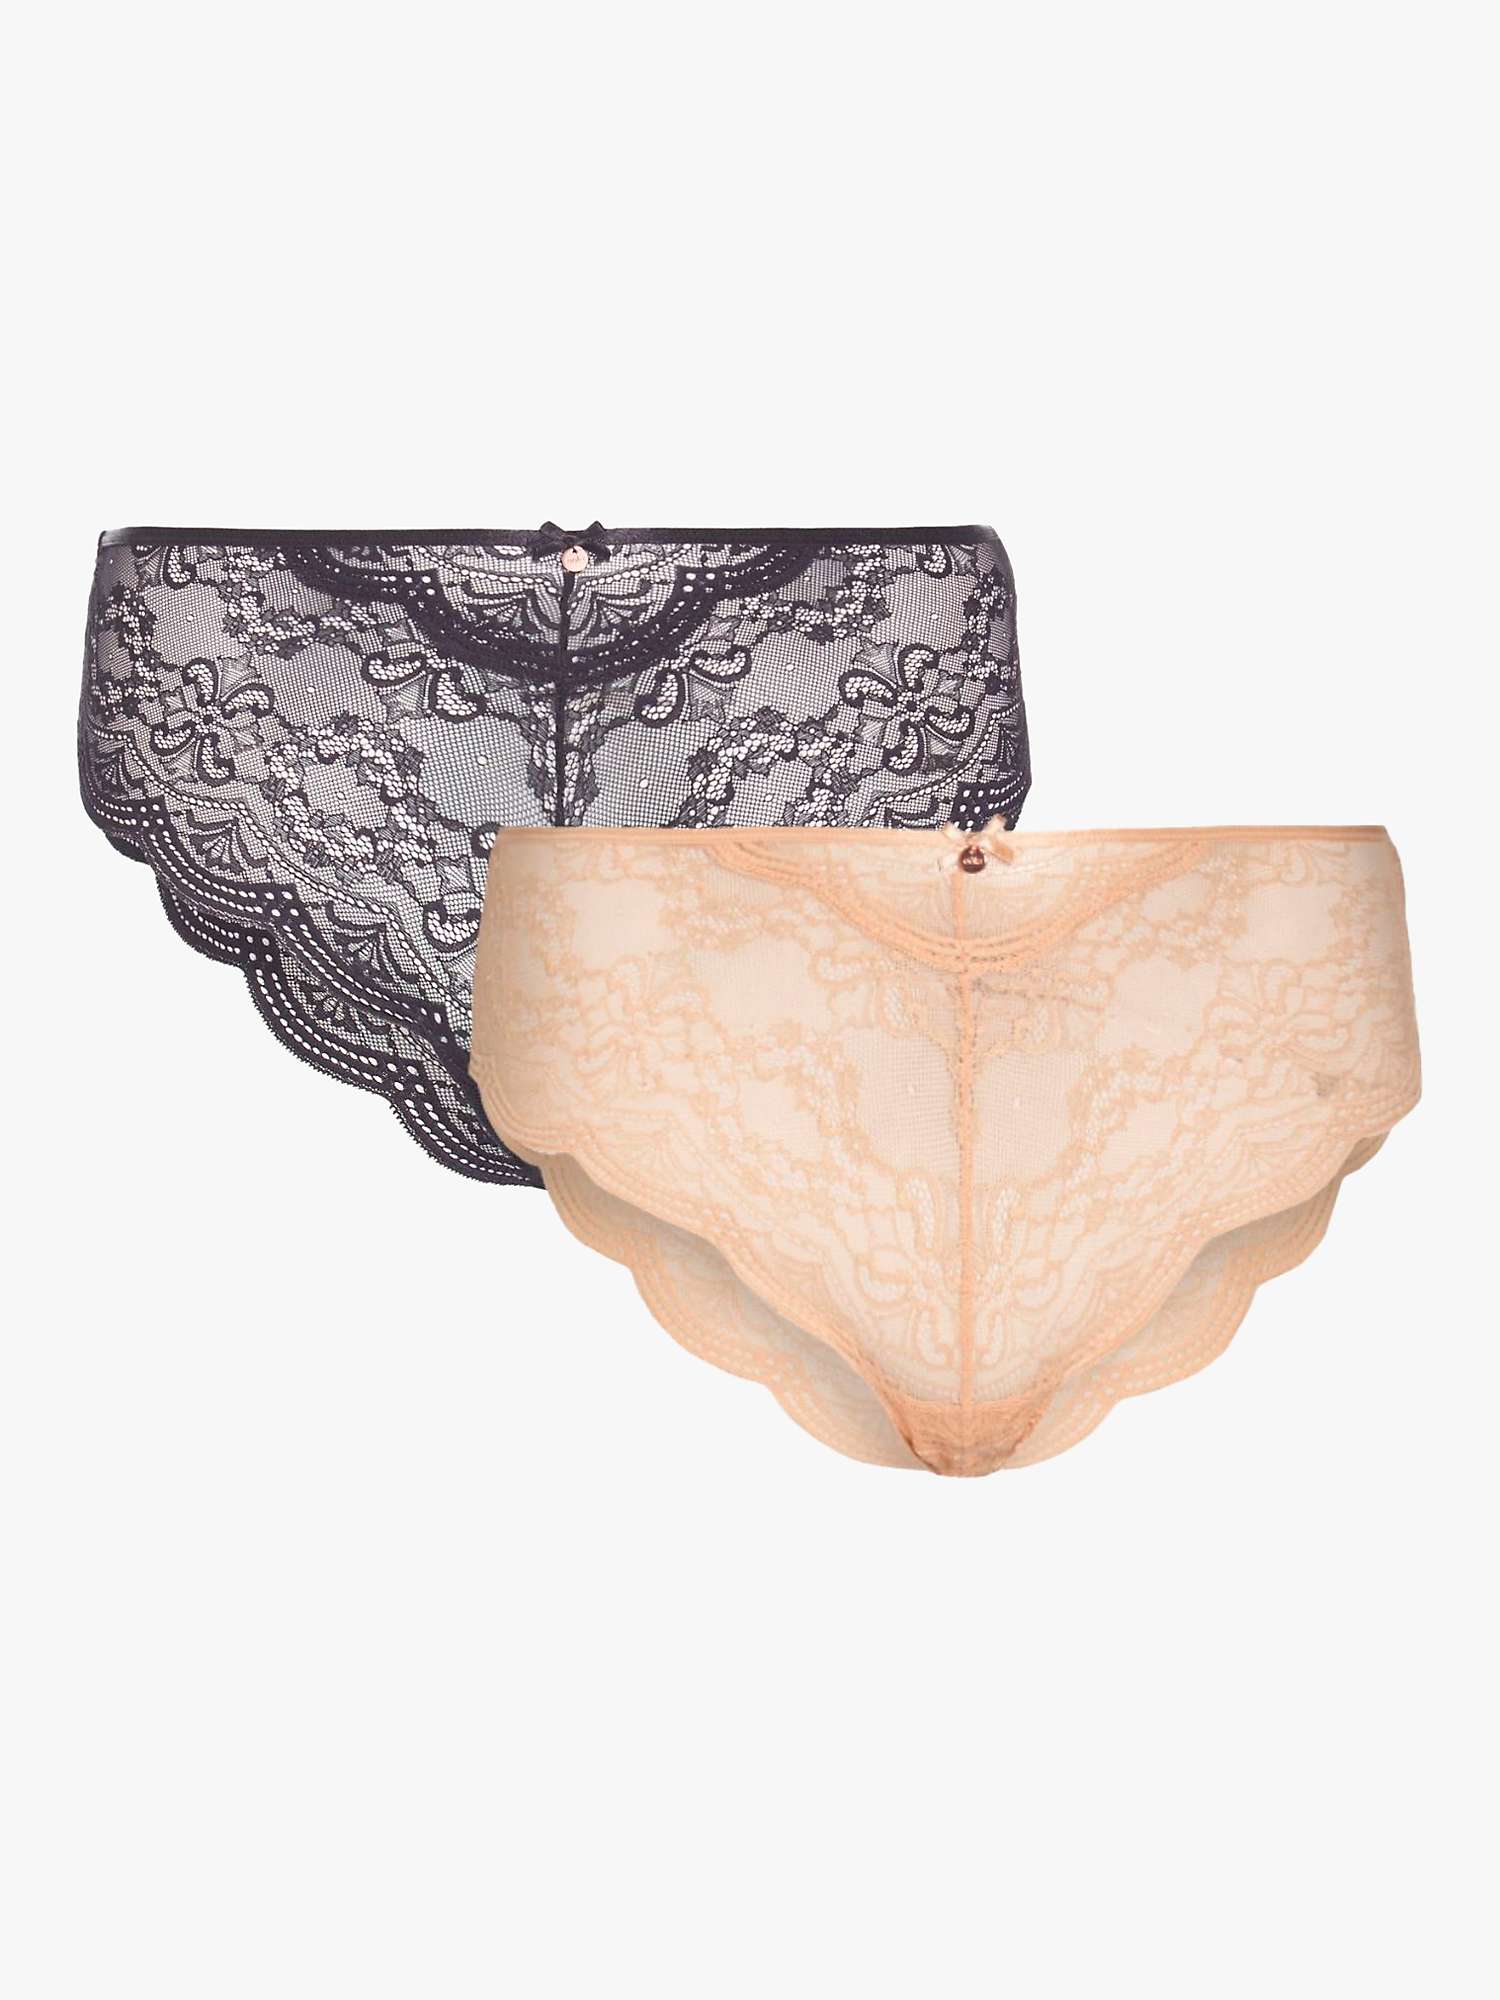 Buy Oola Lingerie Scallop Lace Knickers, Pack of 2, Black/Latte Online at johnlewis.com